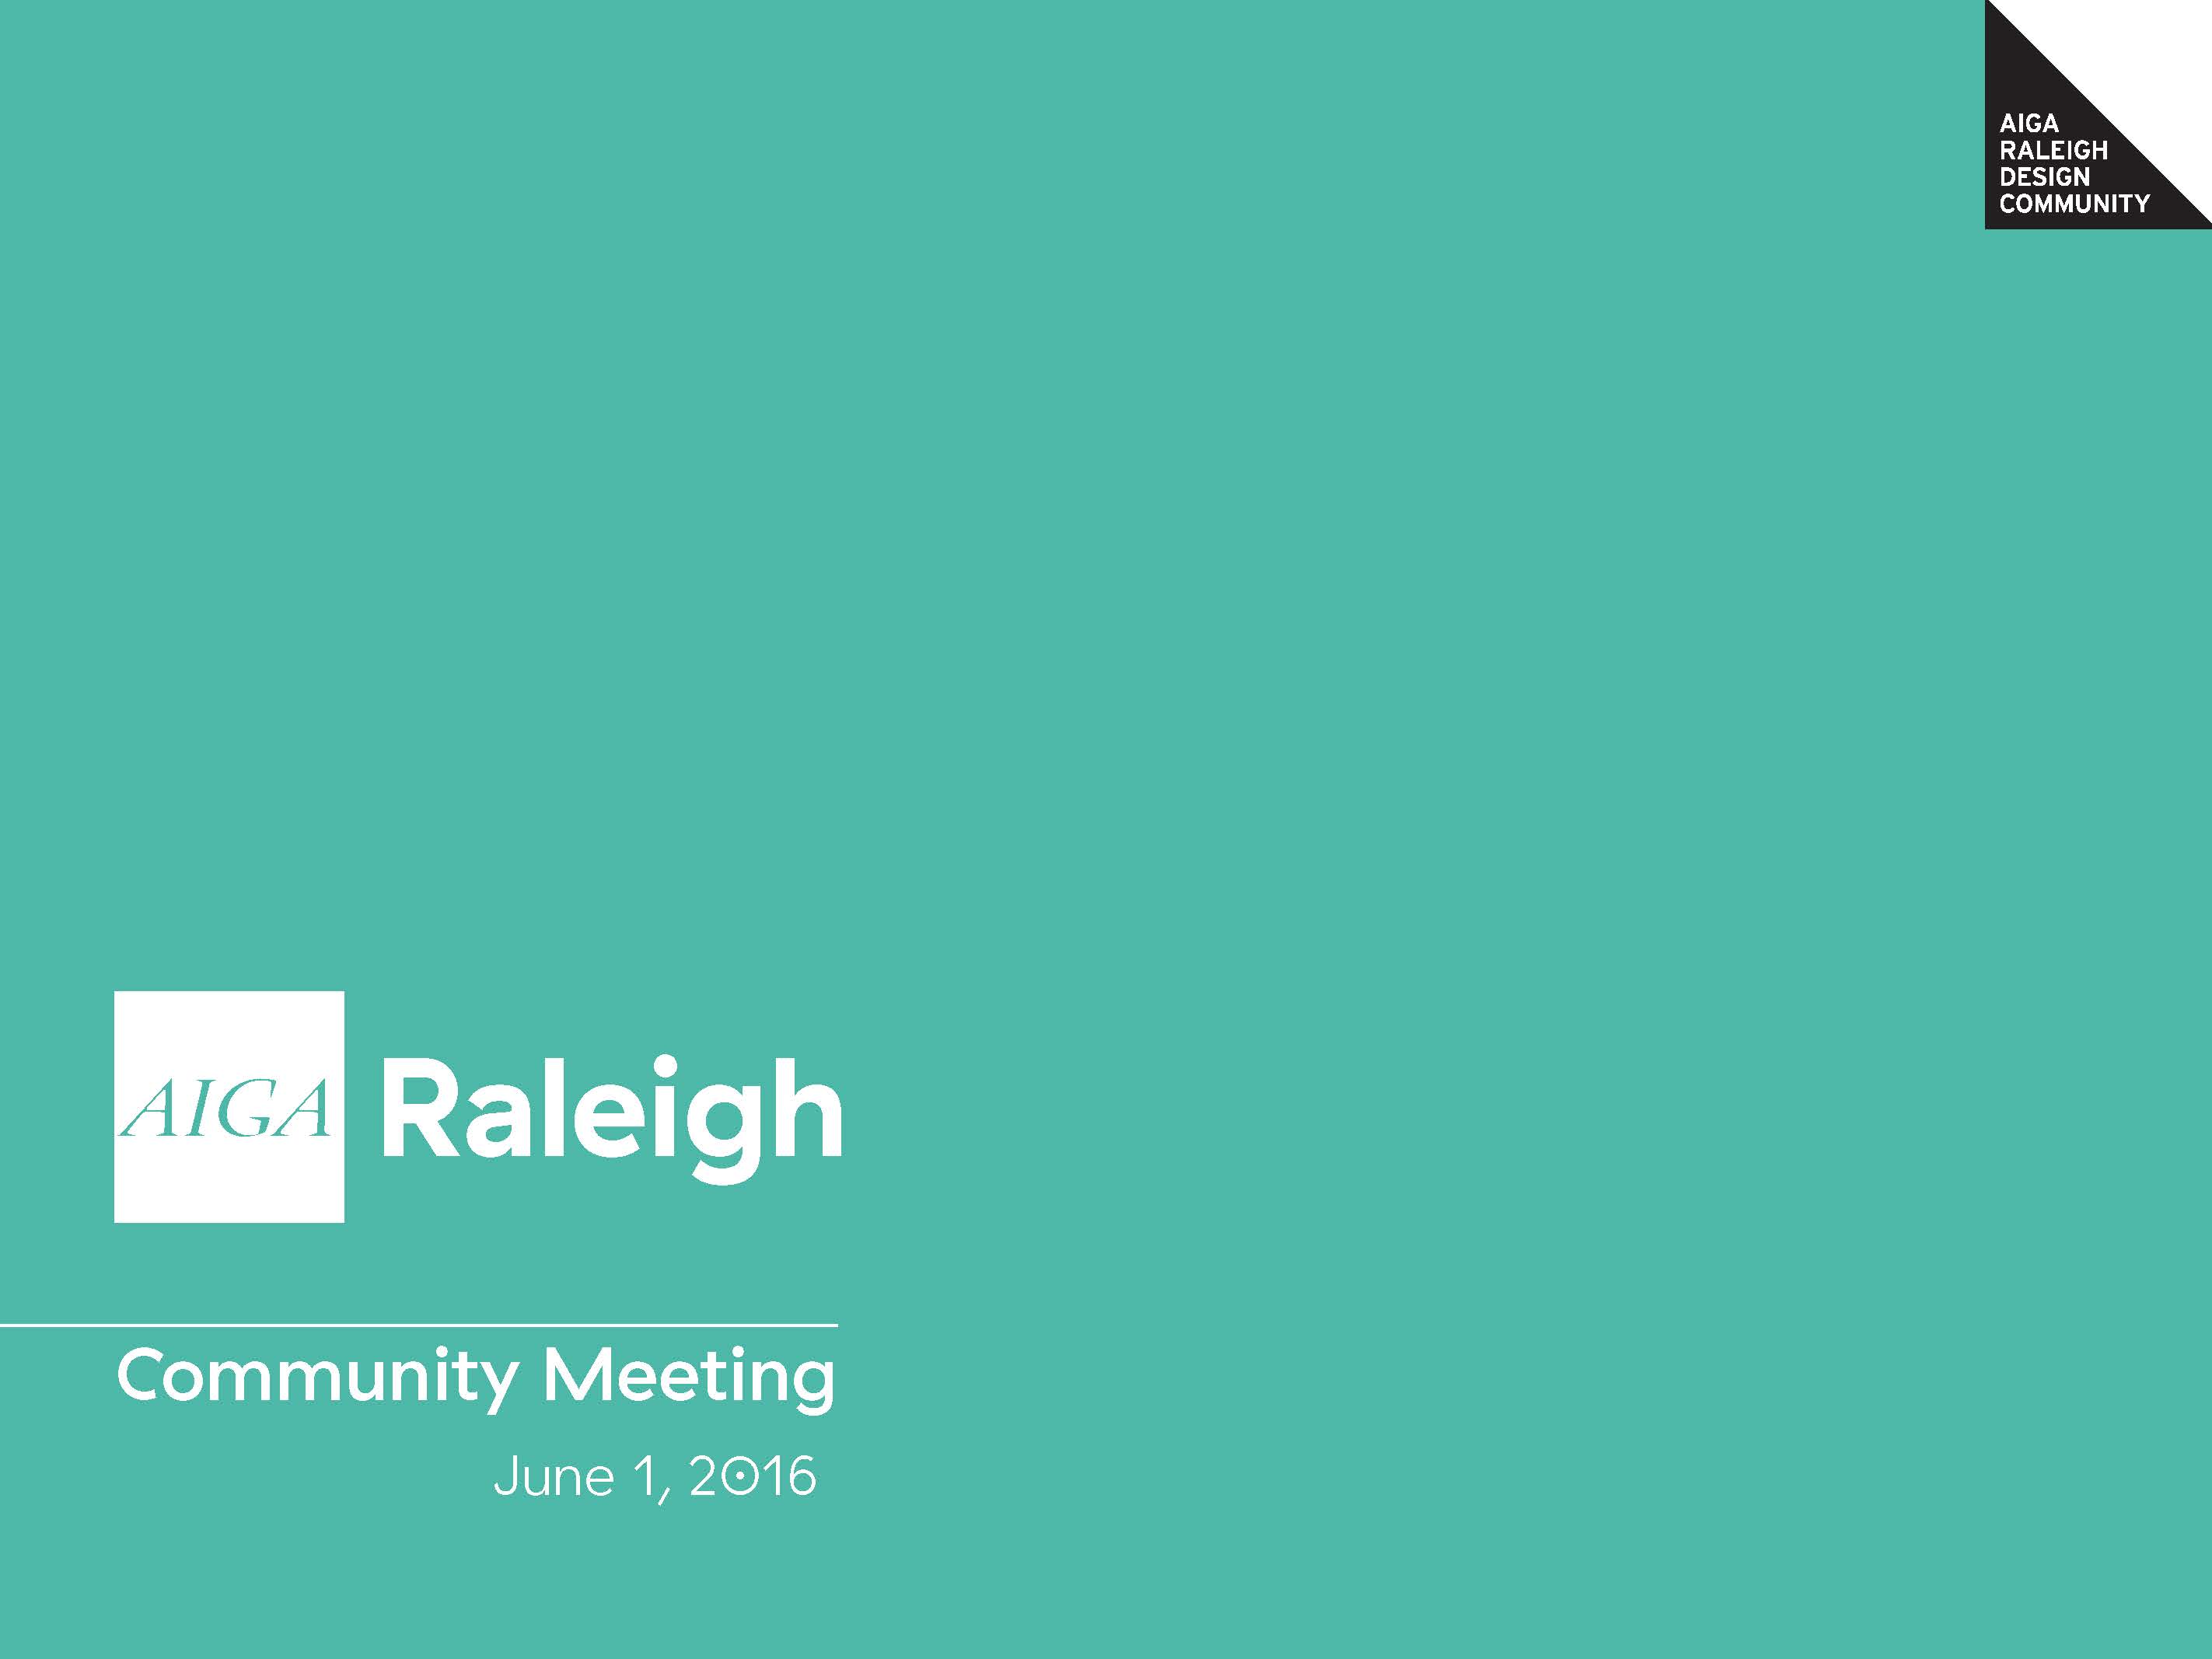 AIGA Raleigh Community Meeting June 2016_Page_01